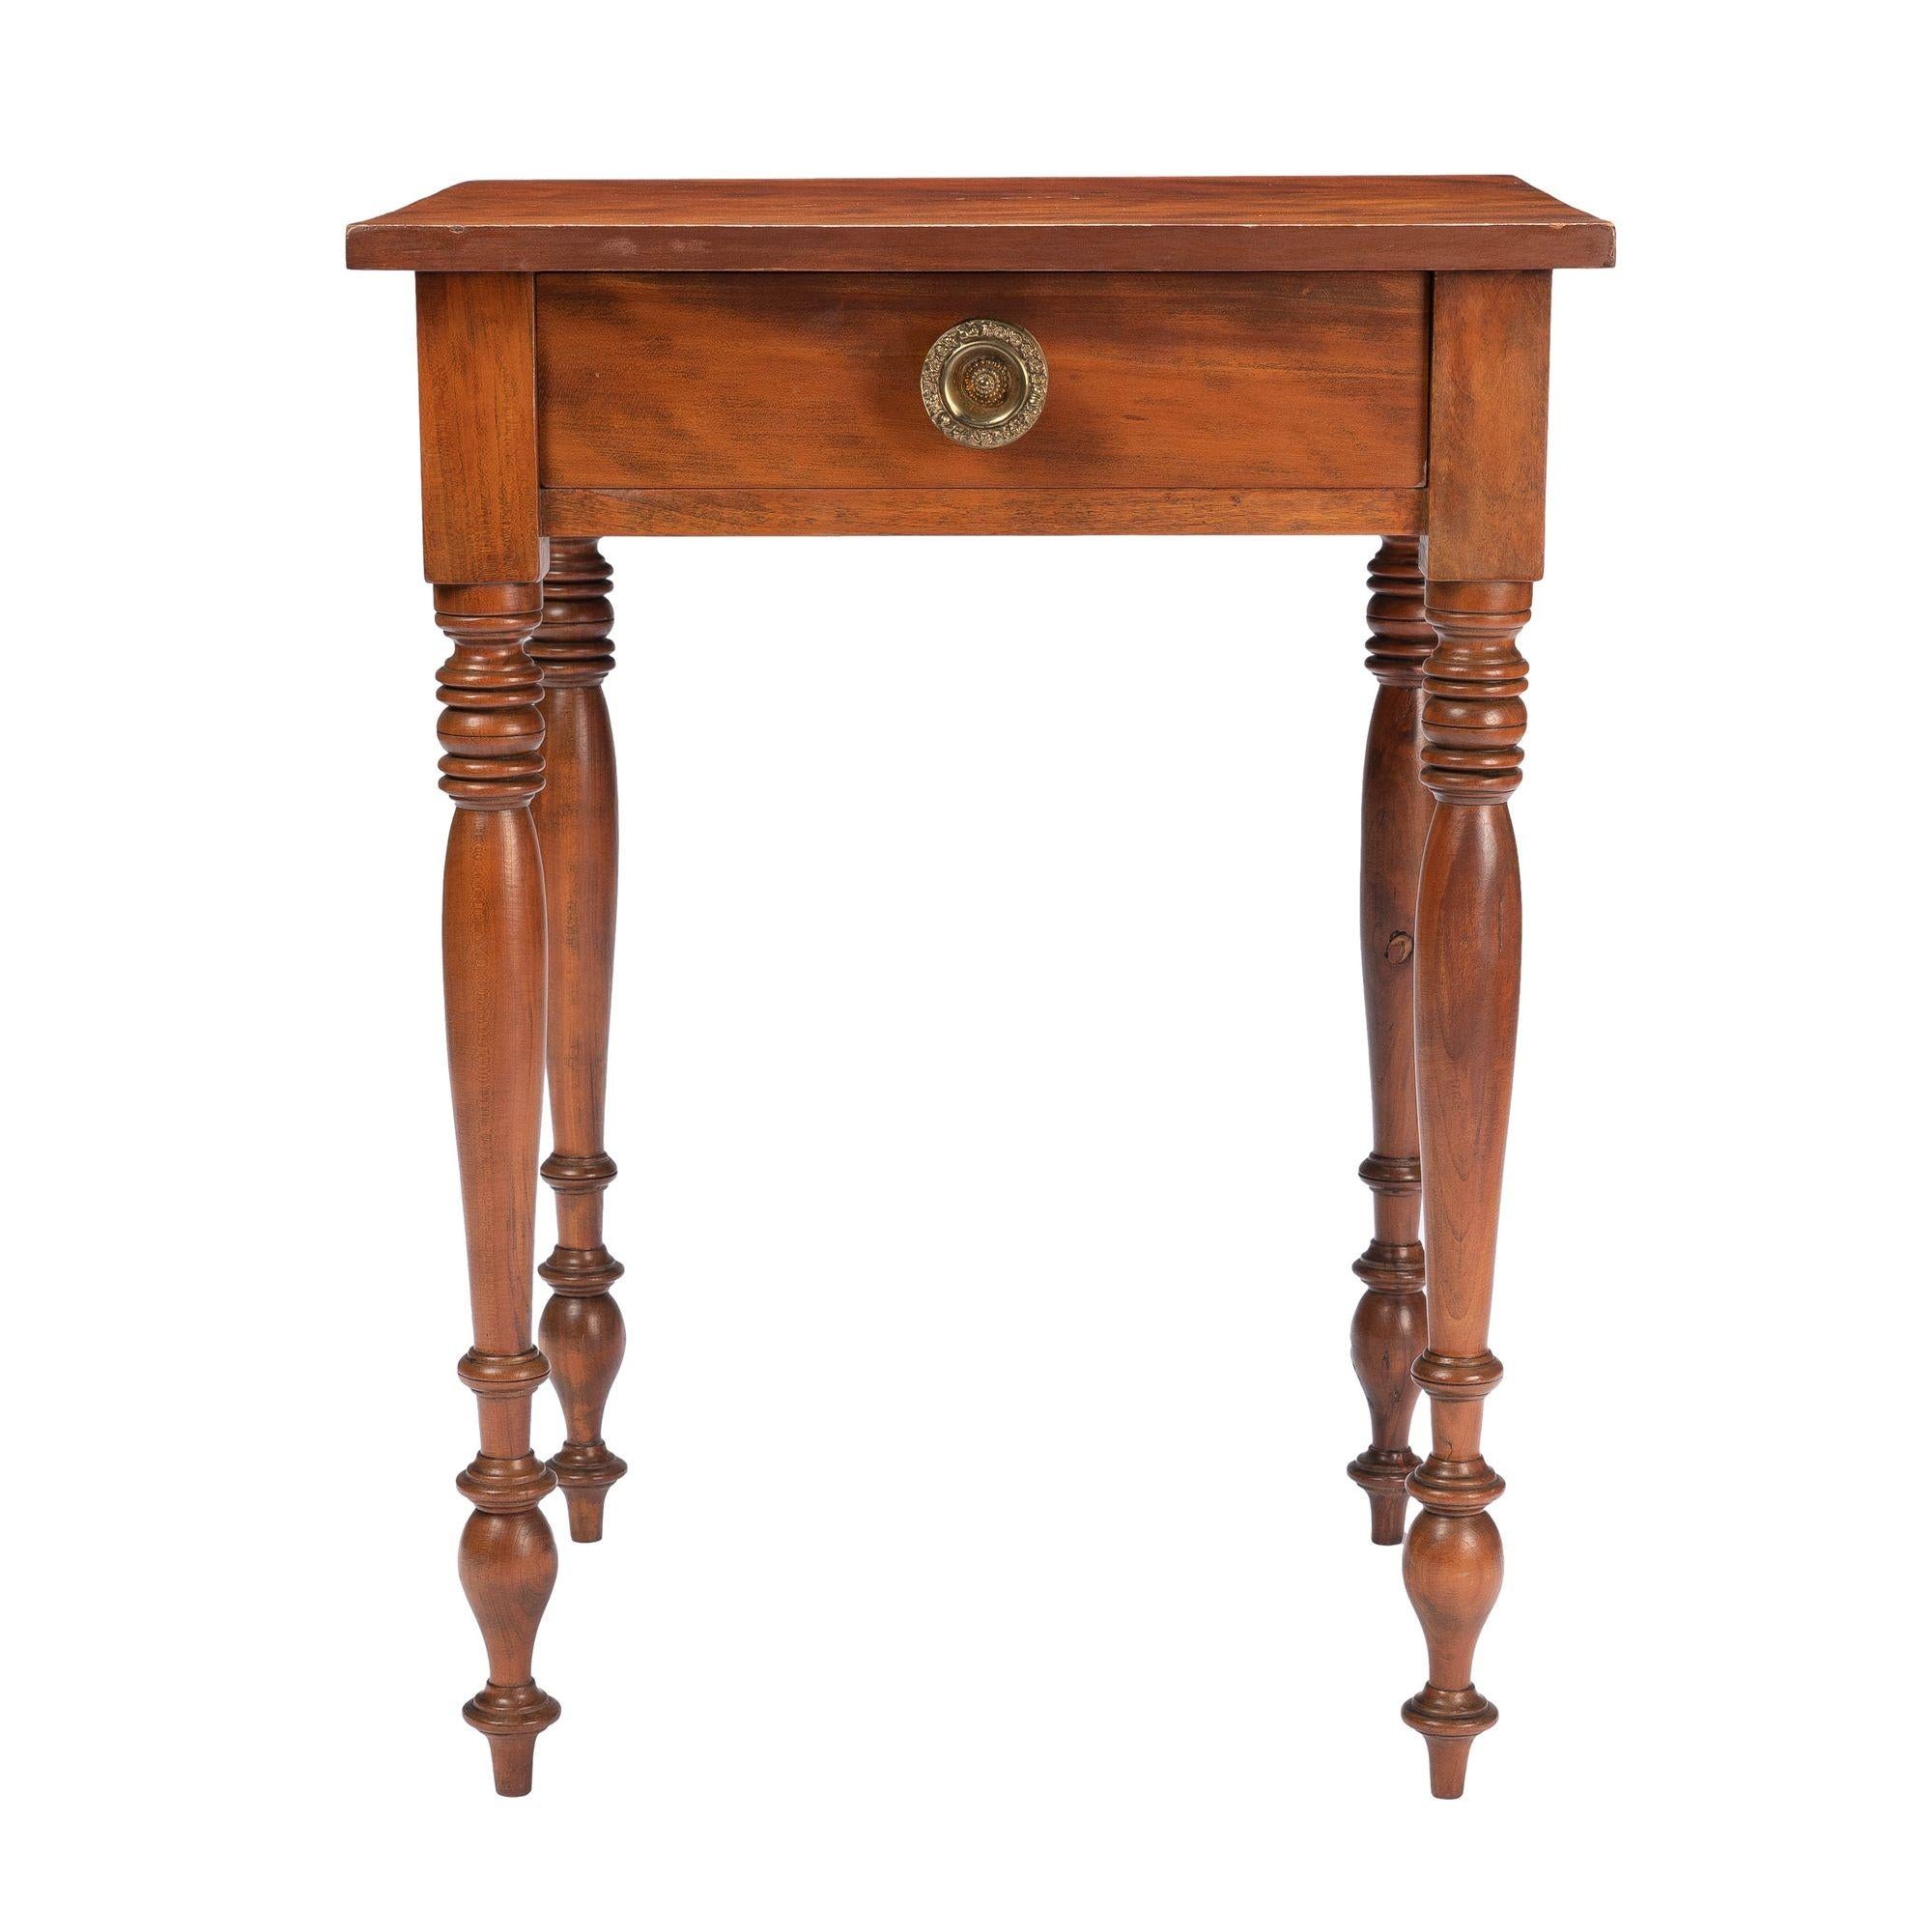 This American Sheraton curly cherry one drawer stand features a single board top on a conforming apron with a single drawer, fitted with its original stamped brass drawer pull. The corner dies continue into vigorously turned legs terminating in a